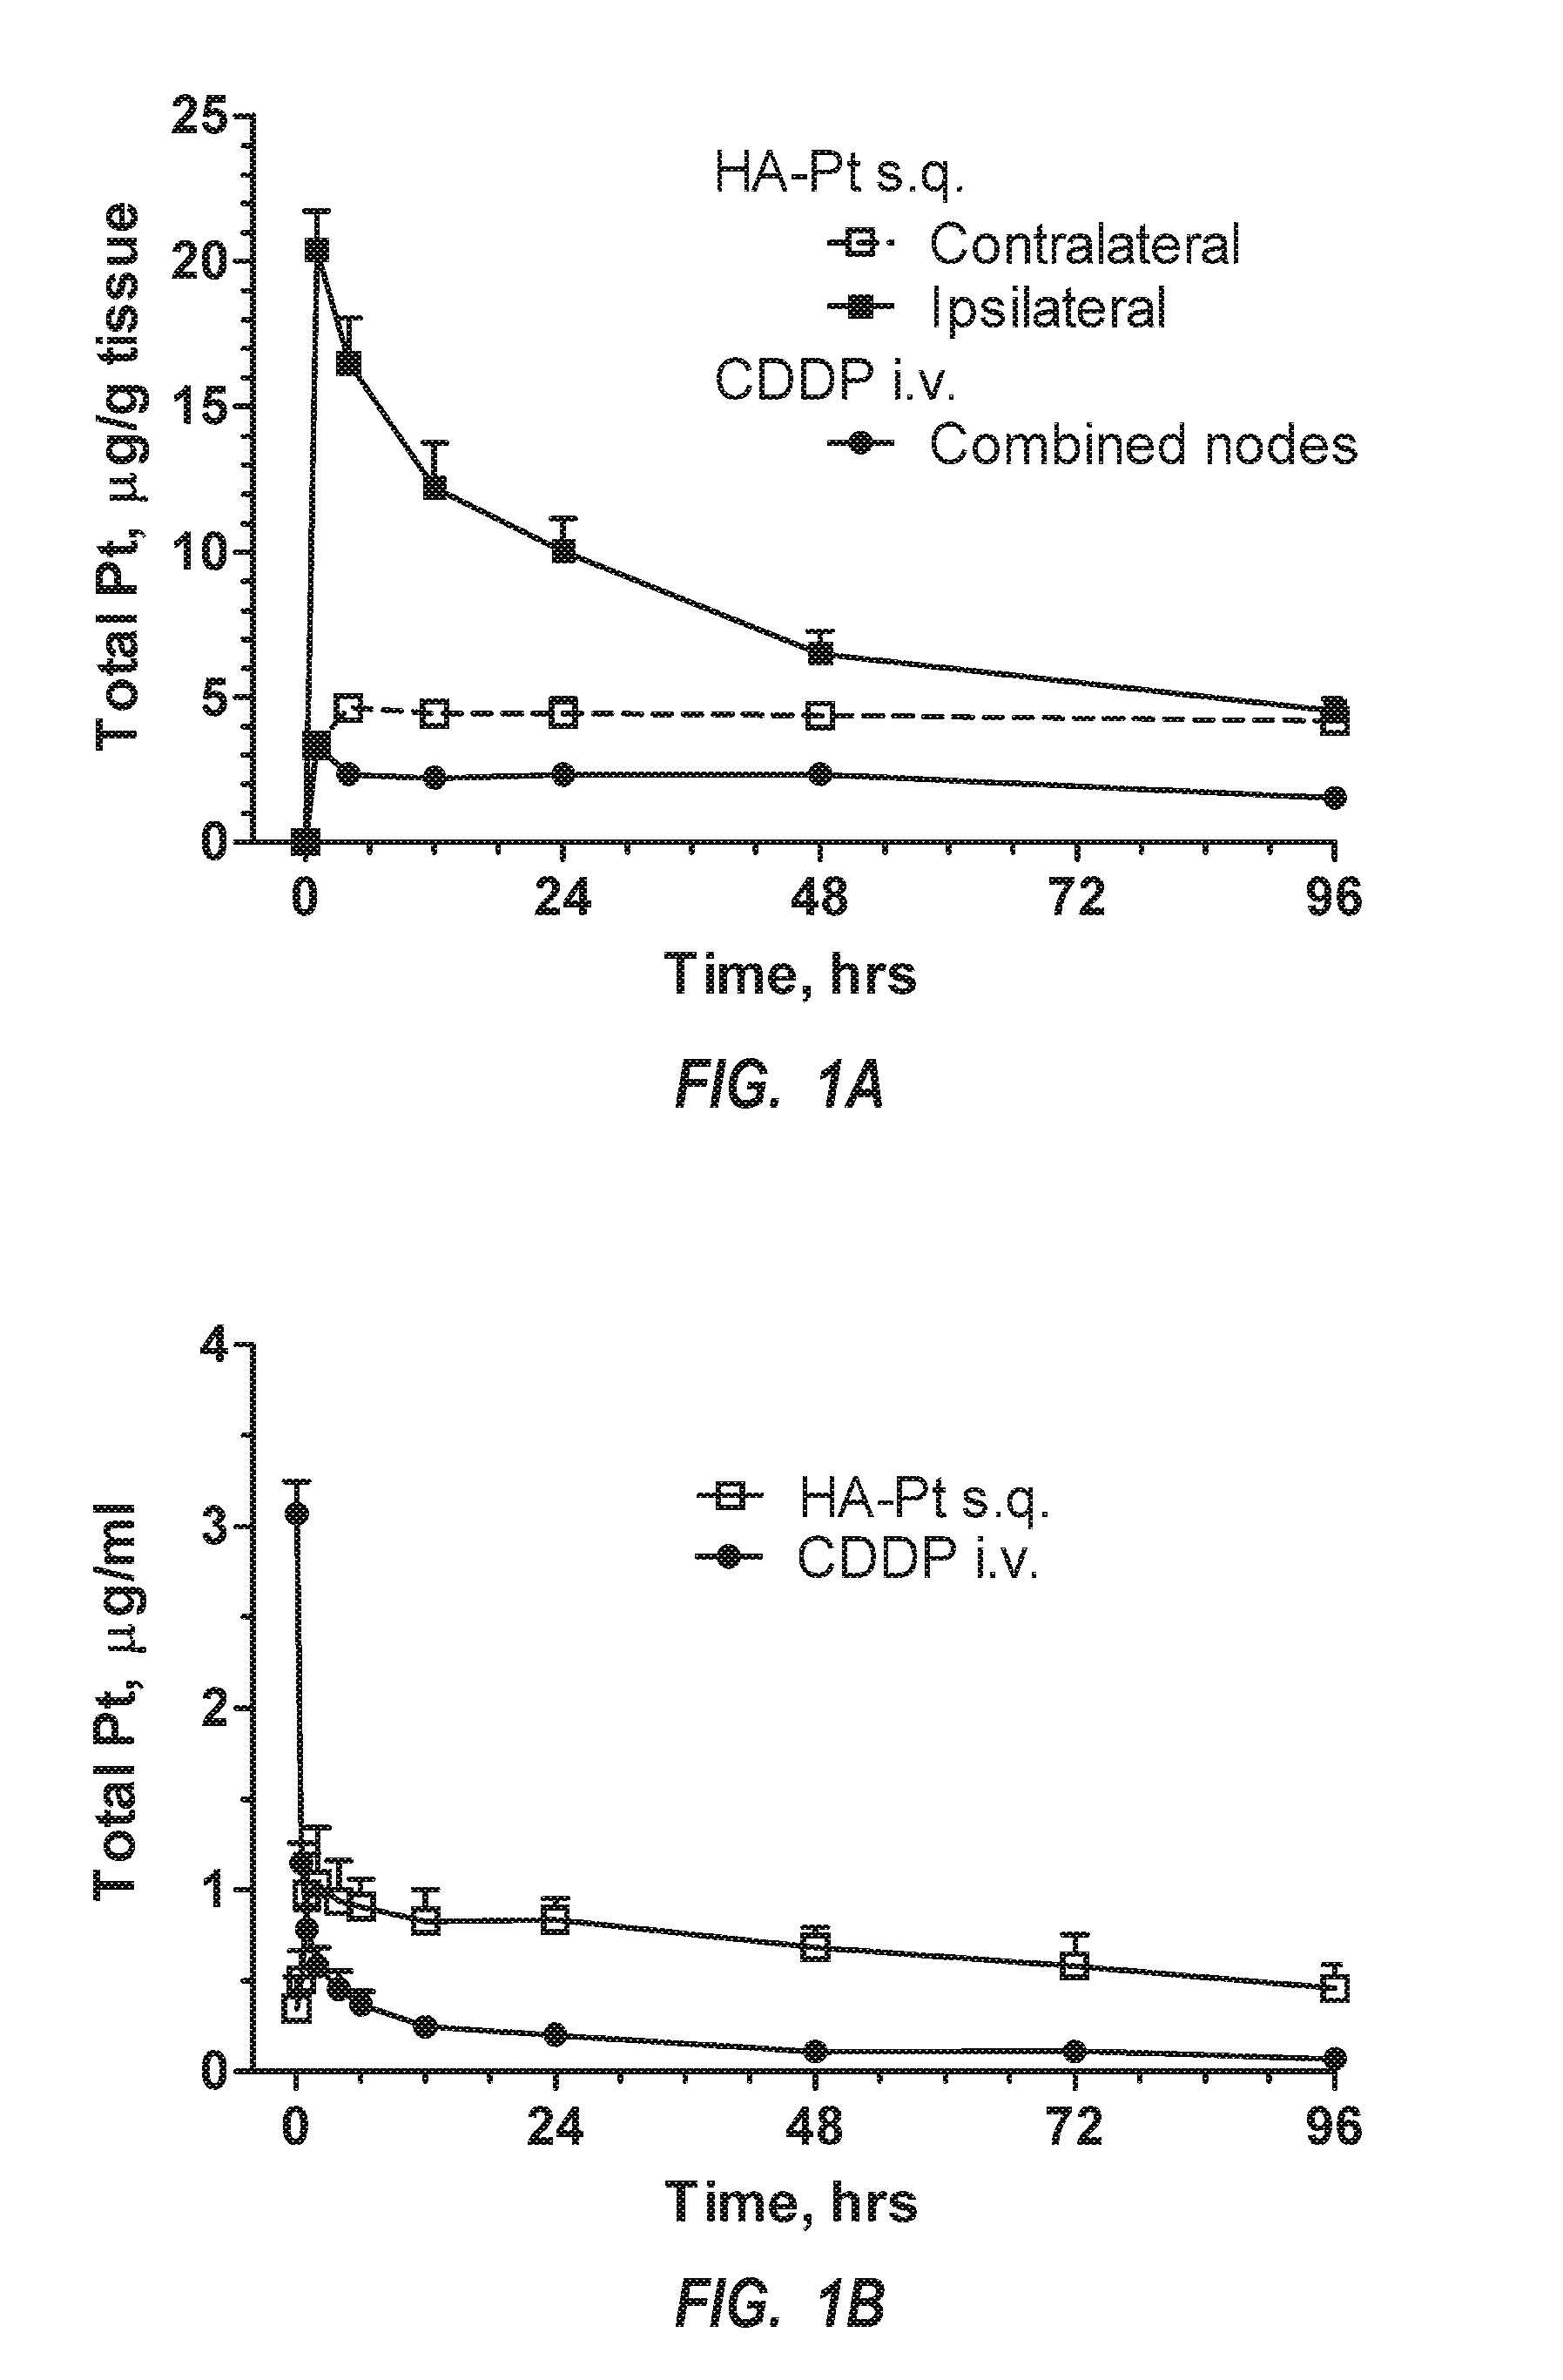 Intralymphatic chemotherapy drug carriers